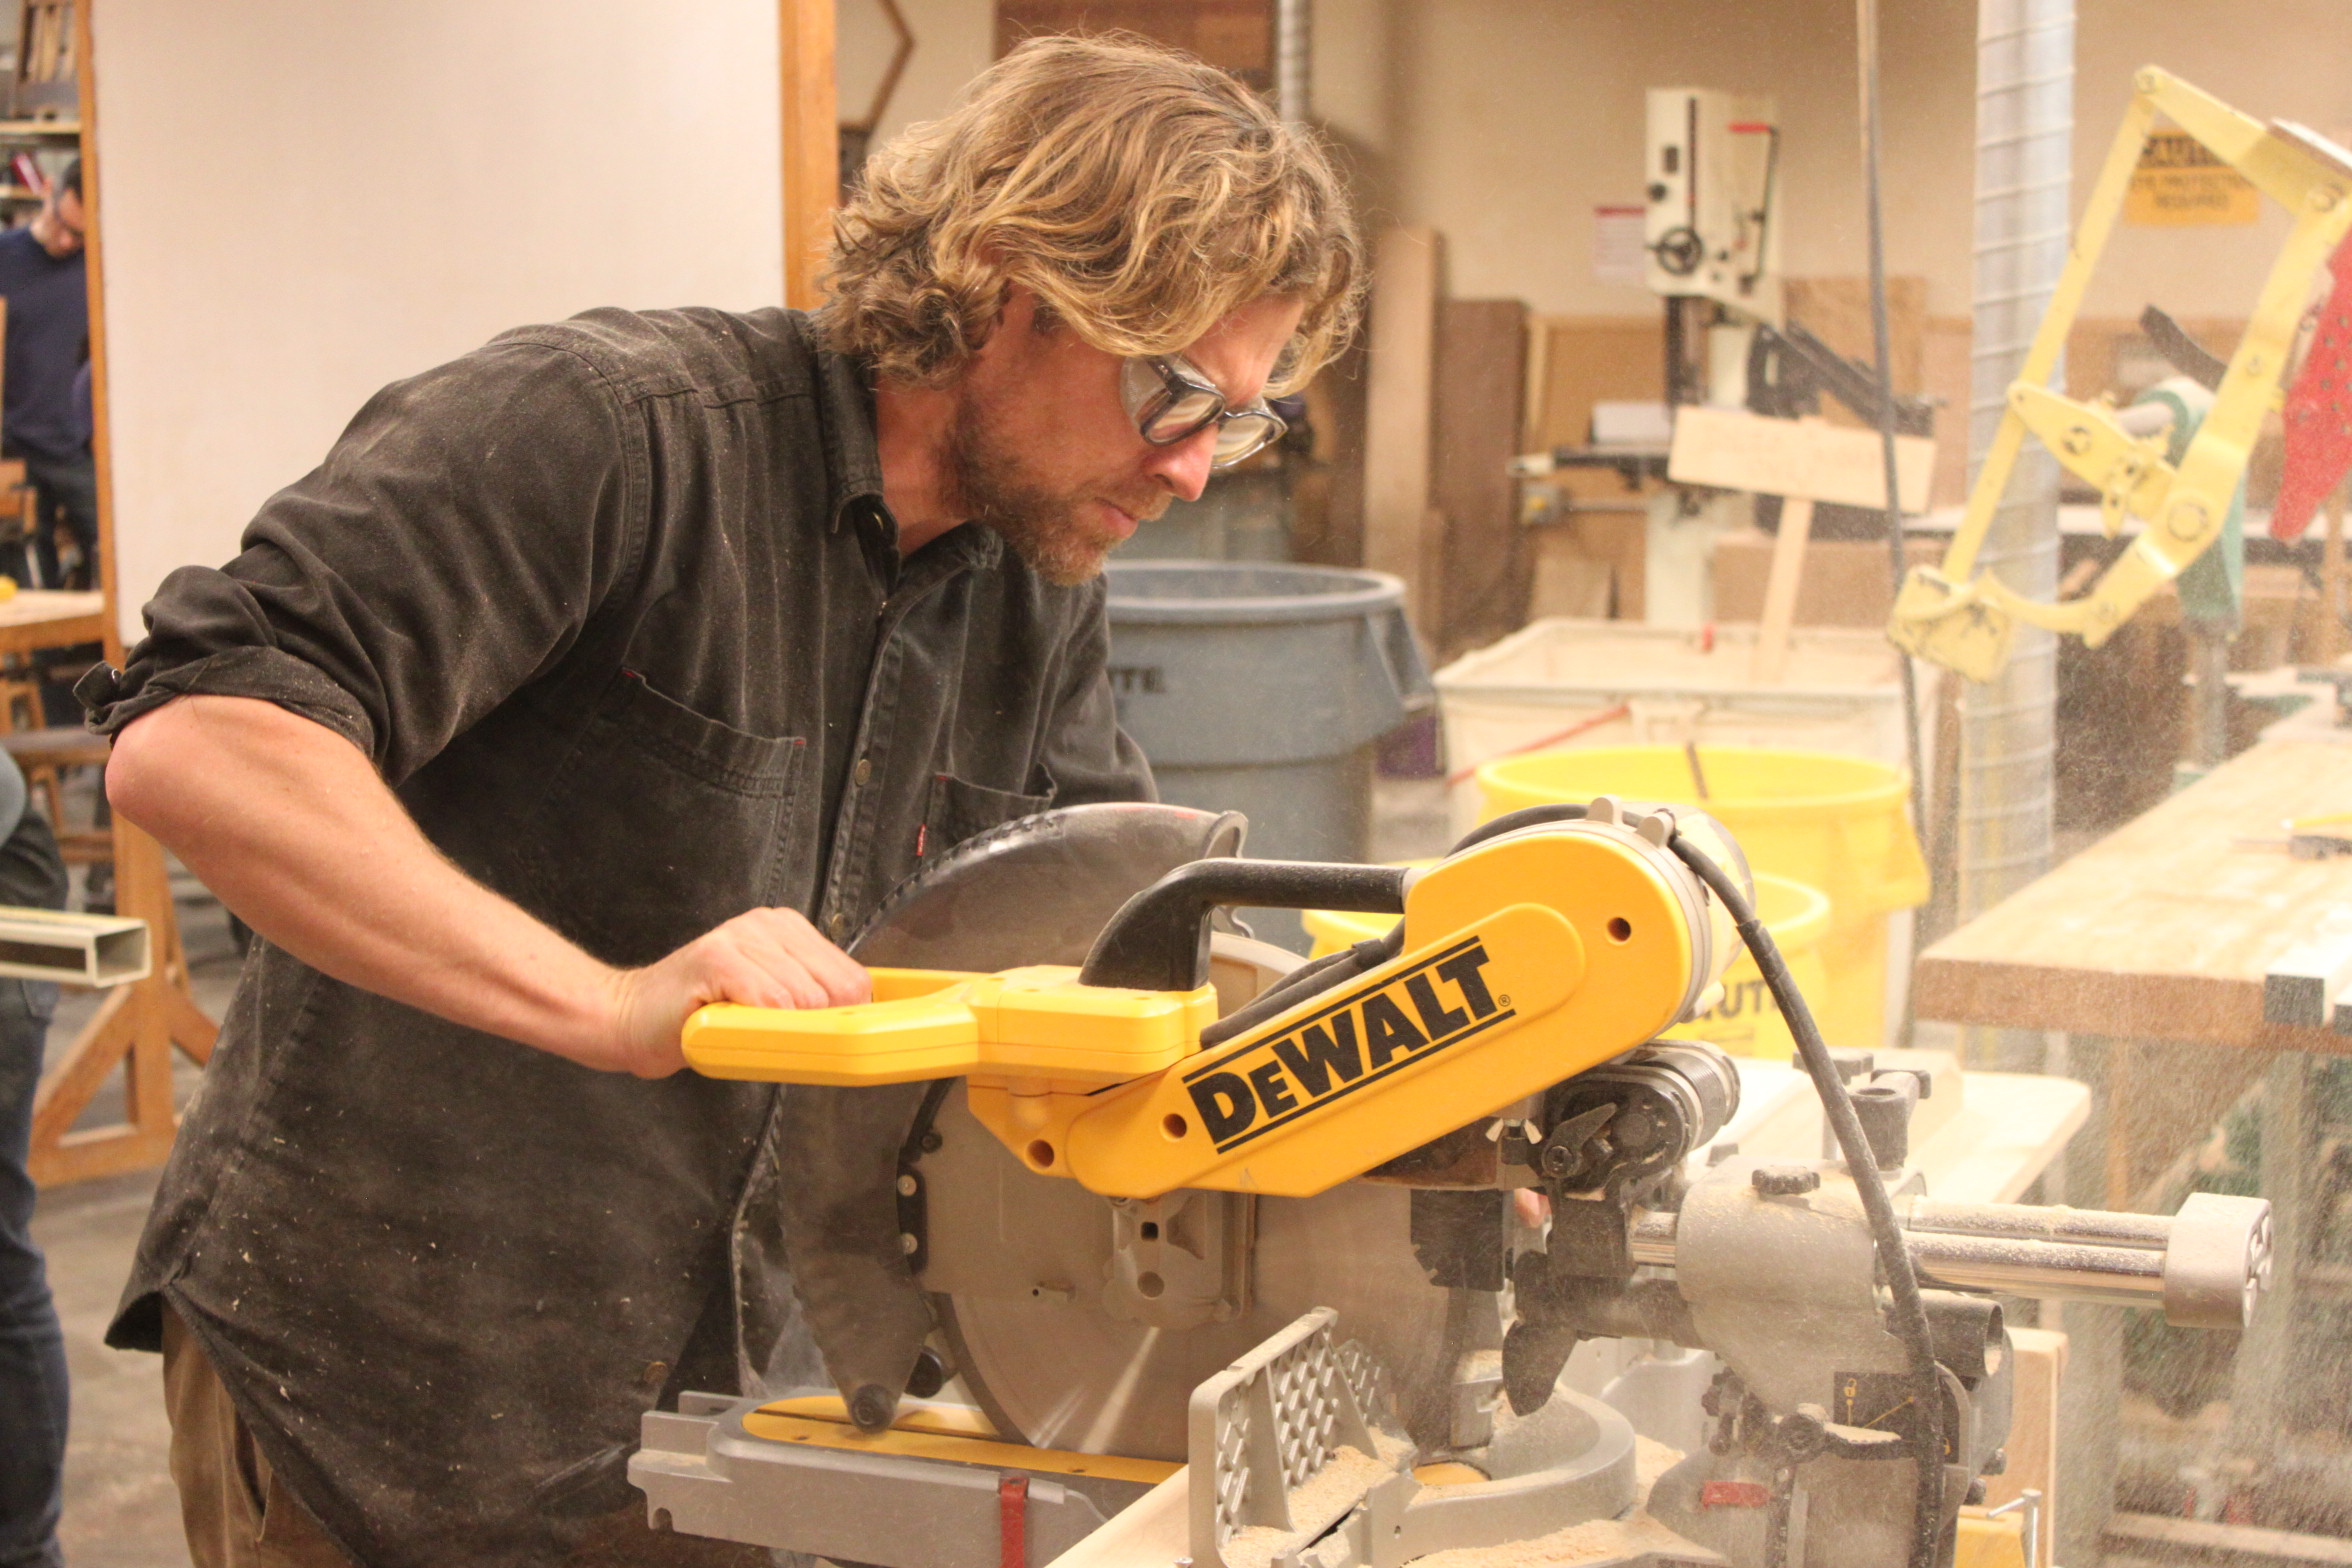 Sawdust flies as industrial design major, Trevor Rogers, works on cabinets for his apartment using a compound miter saw. Photo taken on Oct. 27, 2017.  